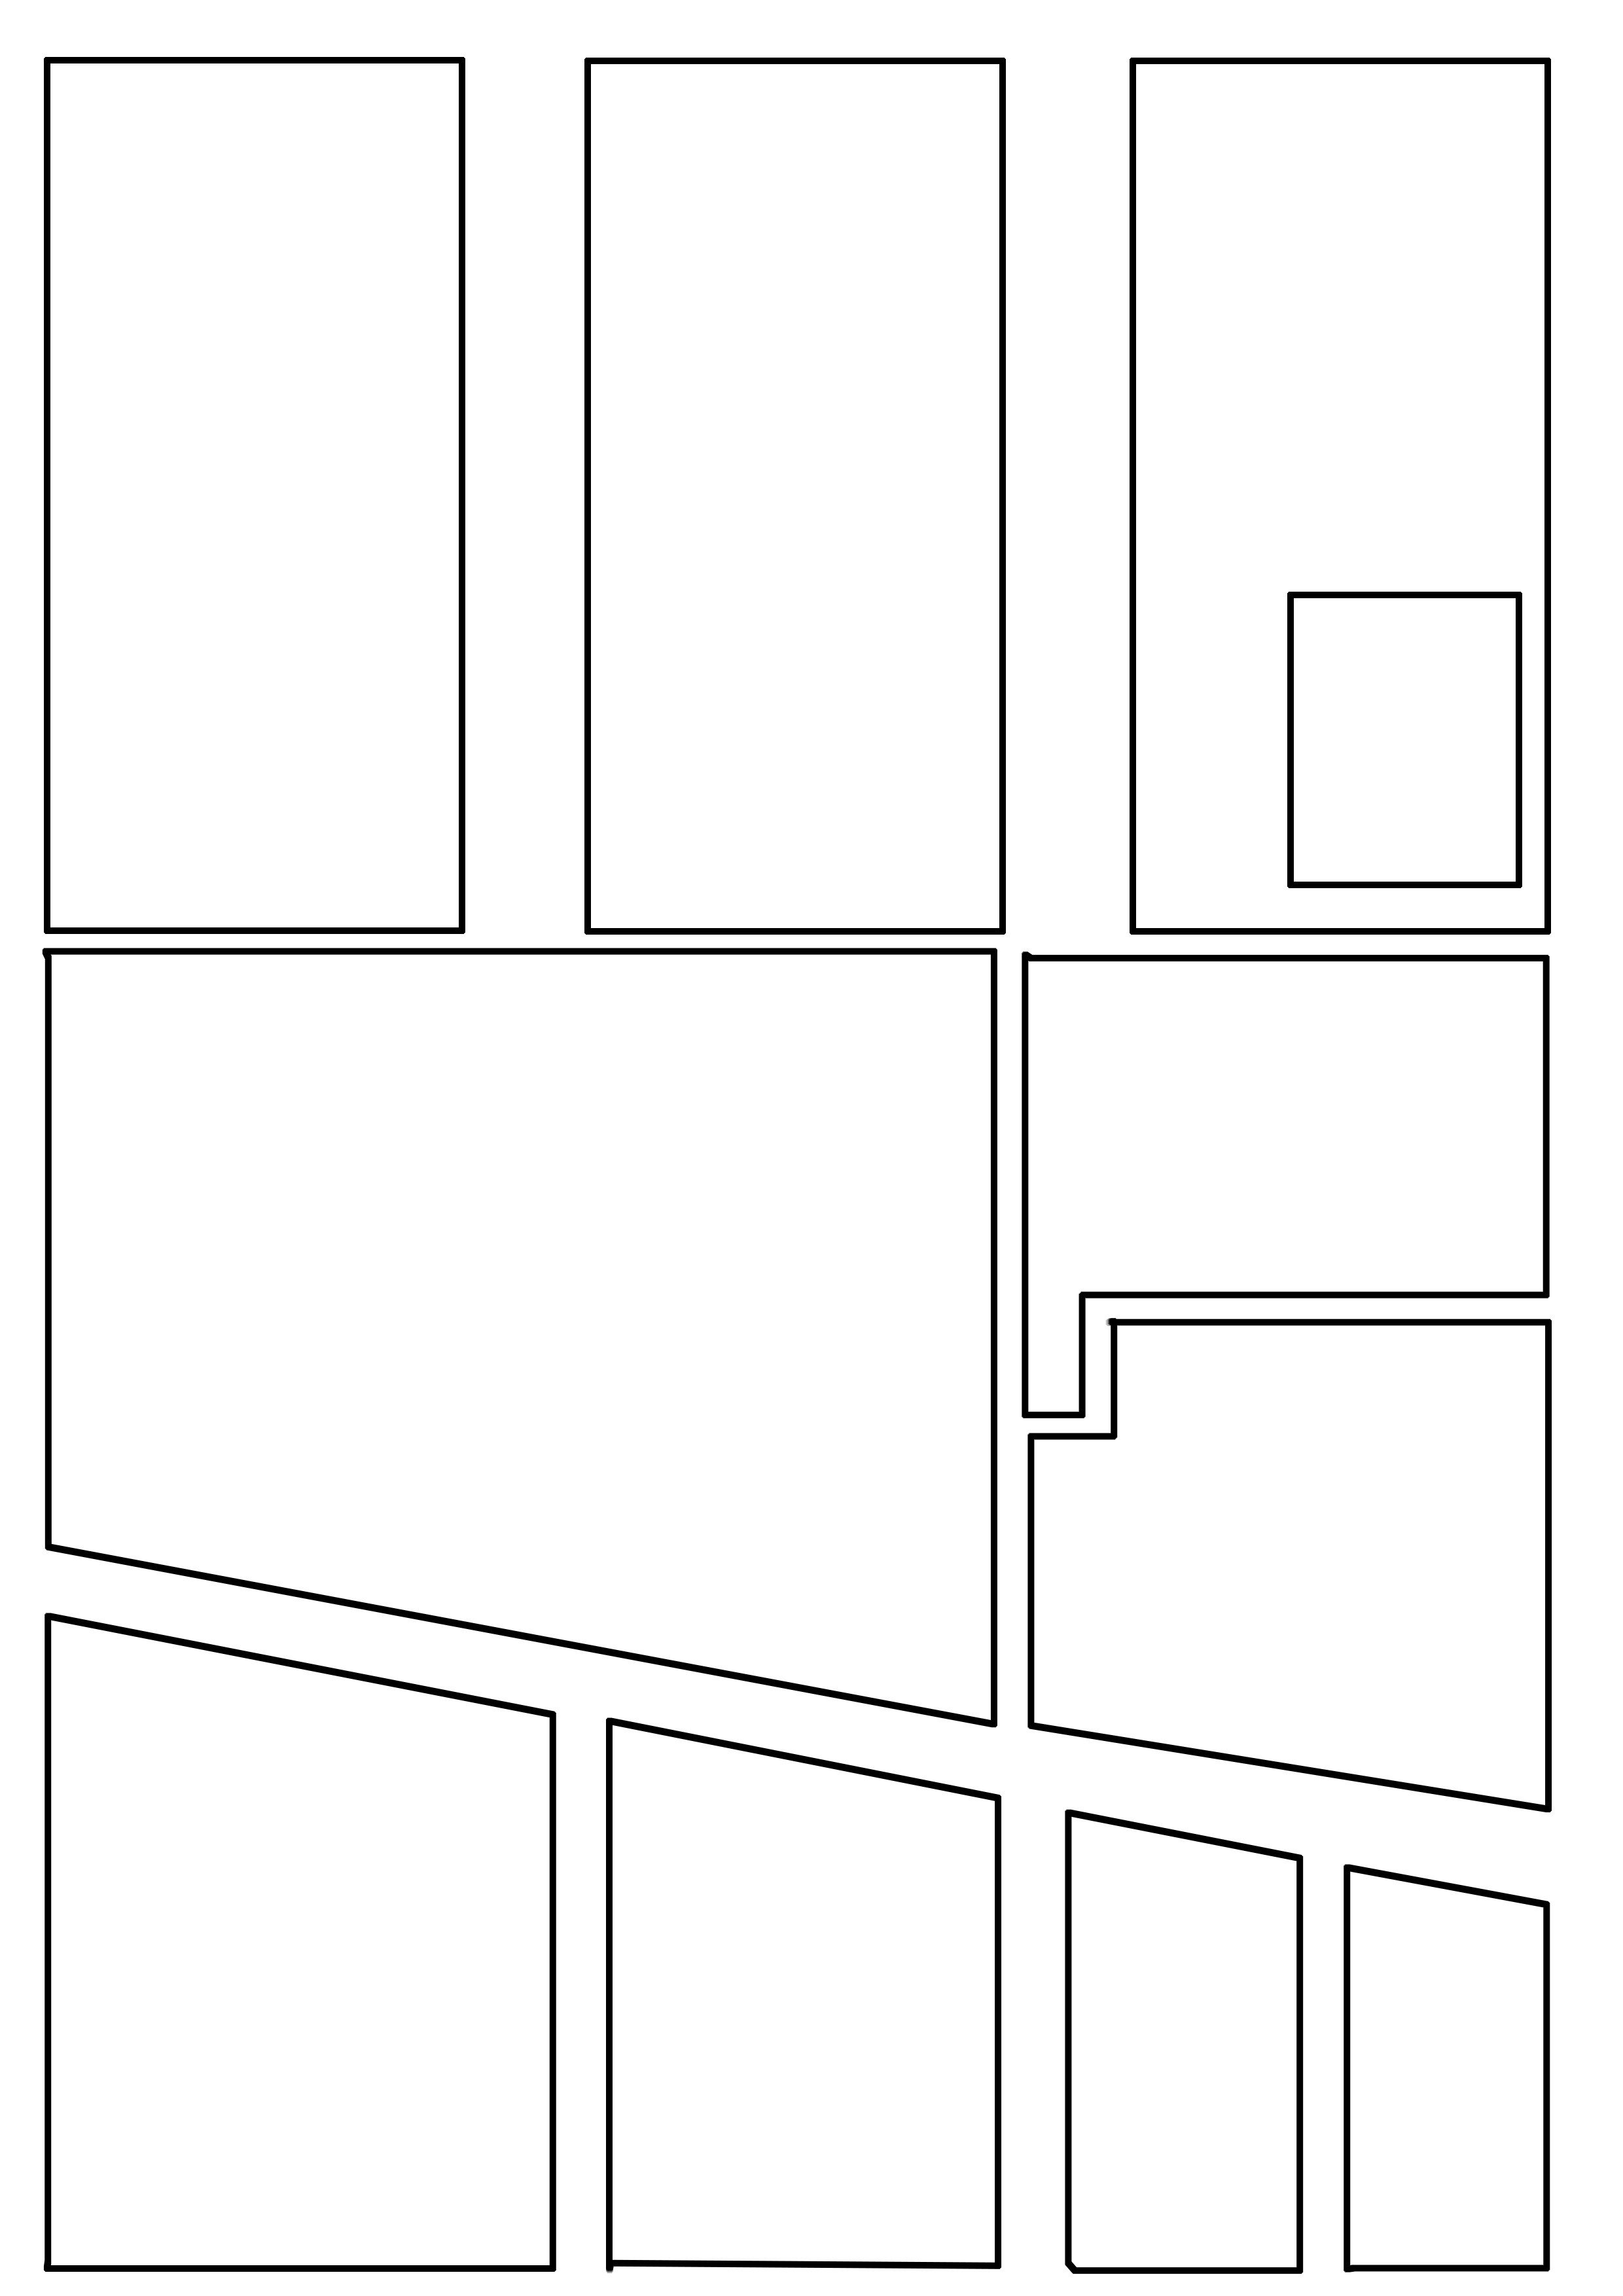 Comic Book Panel Template Ic Layout Experiments